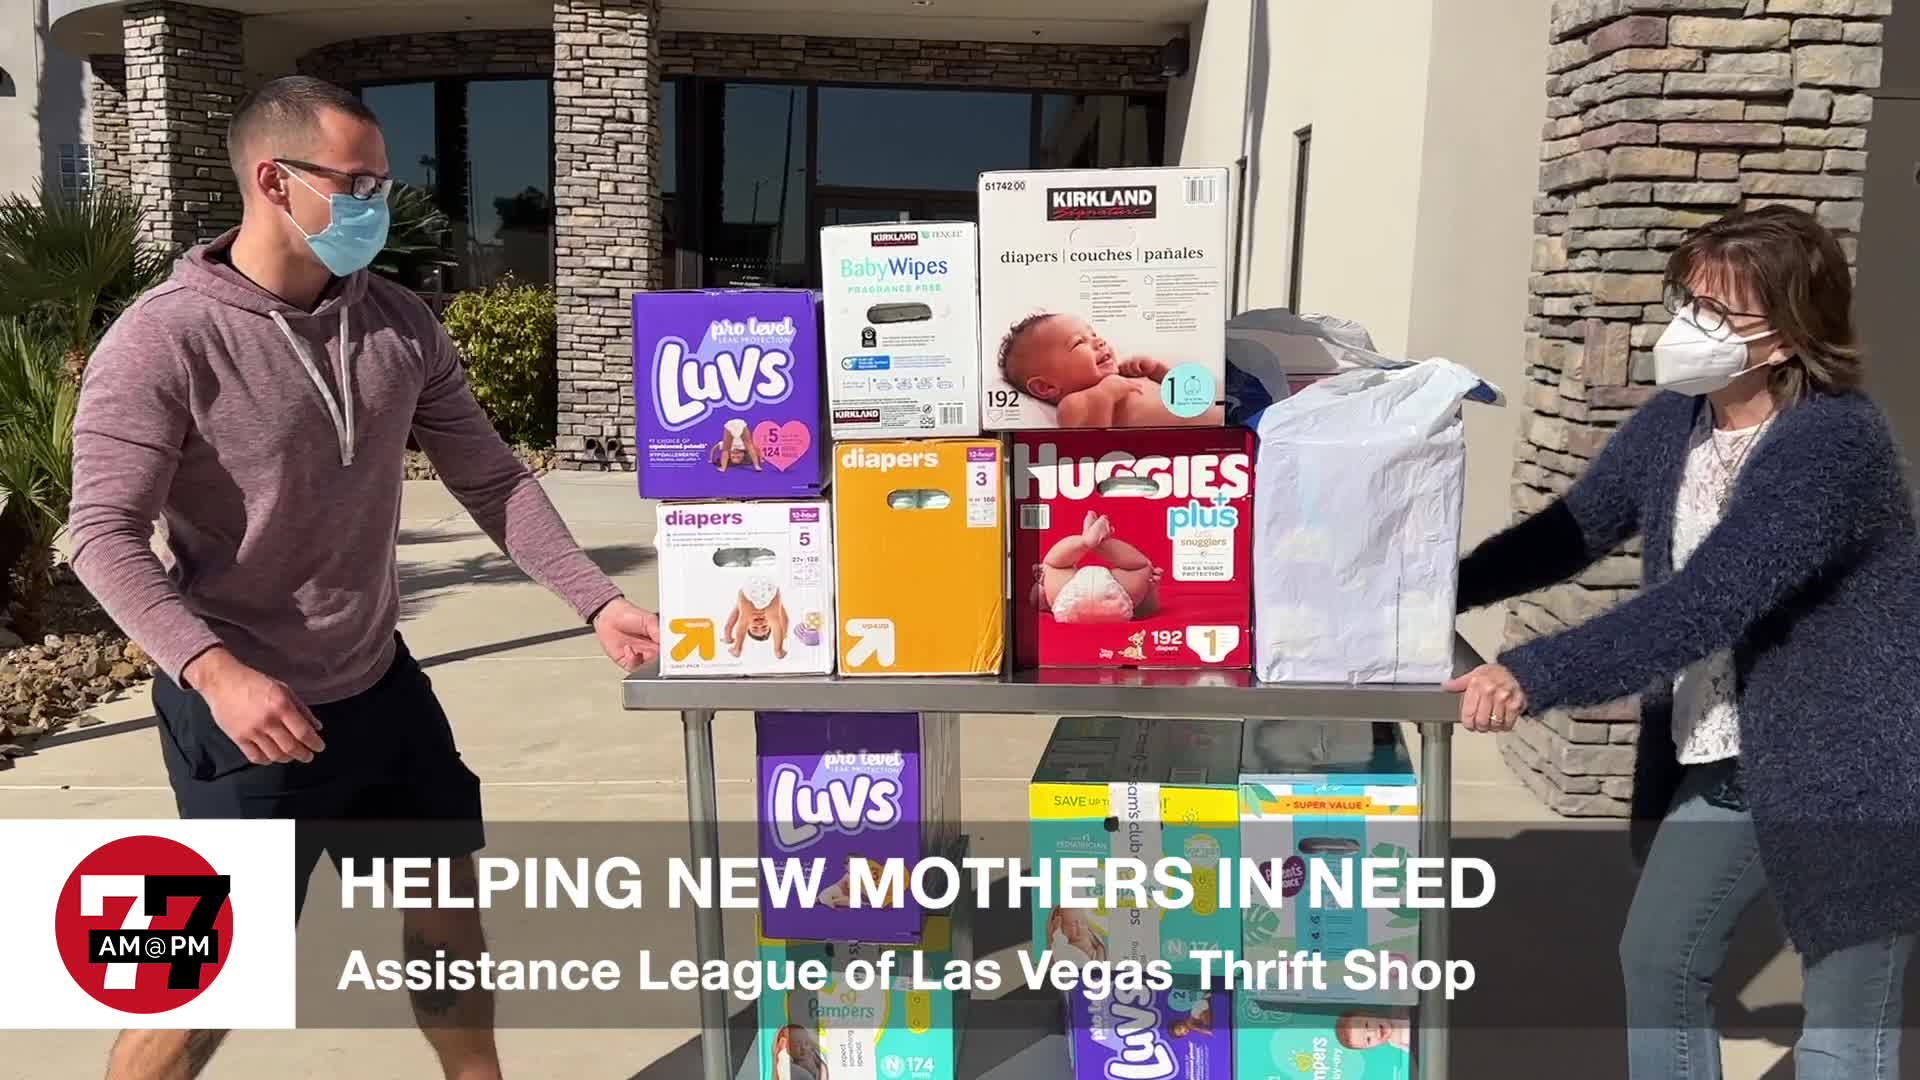 7@7PM Helping New Mothers In Need